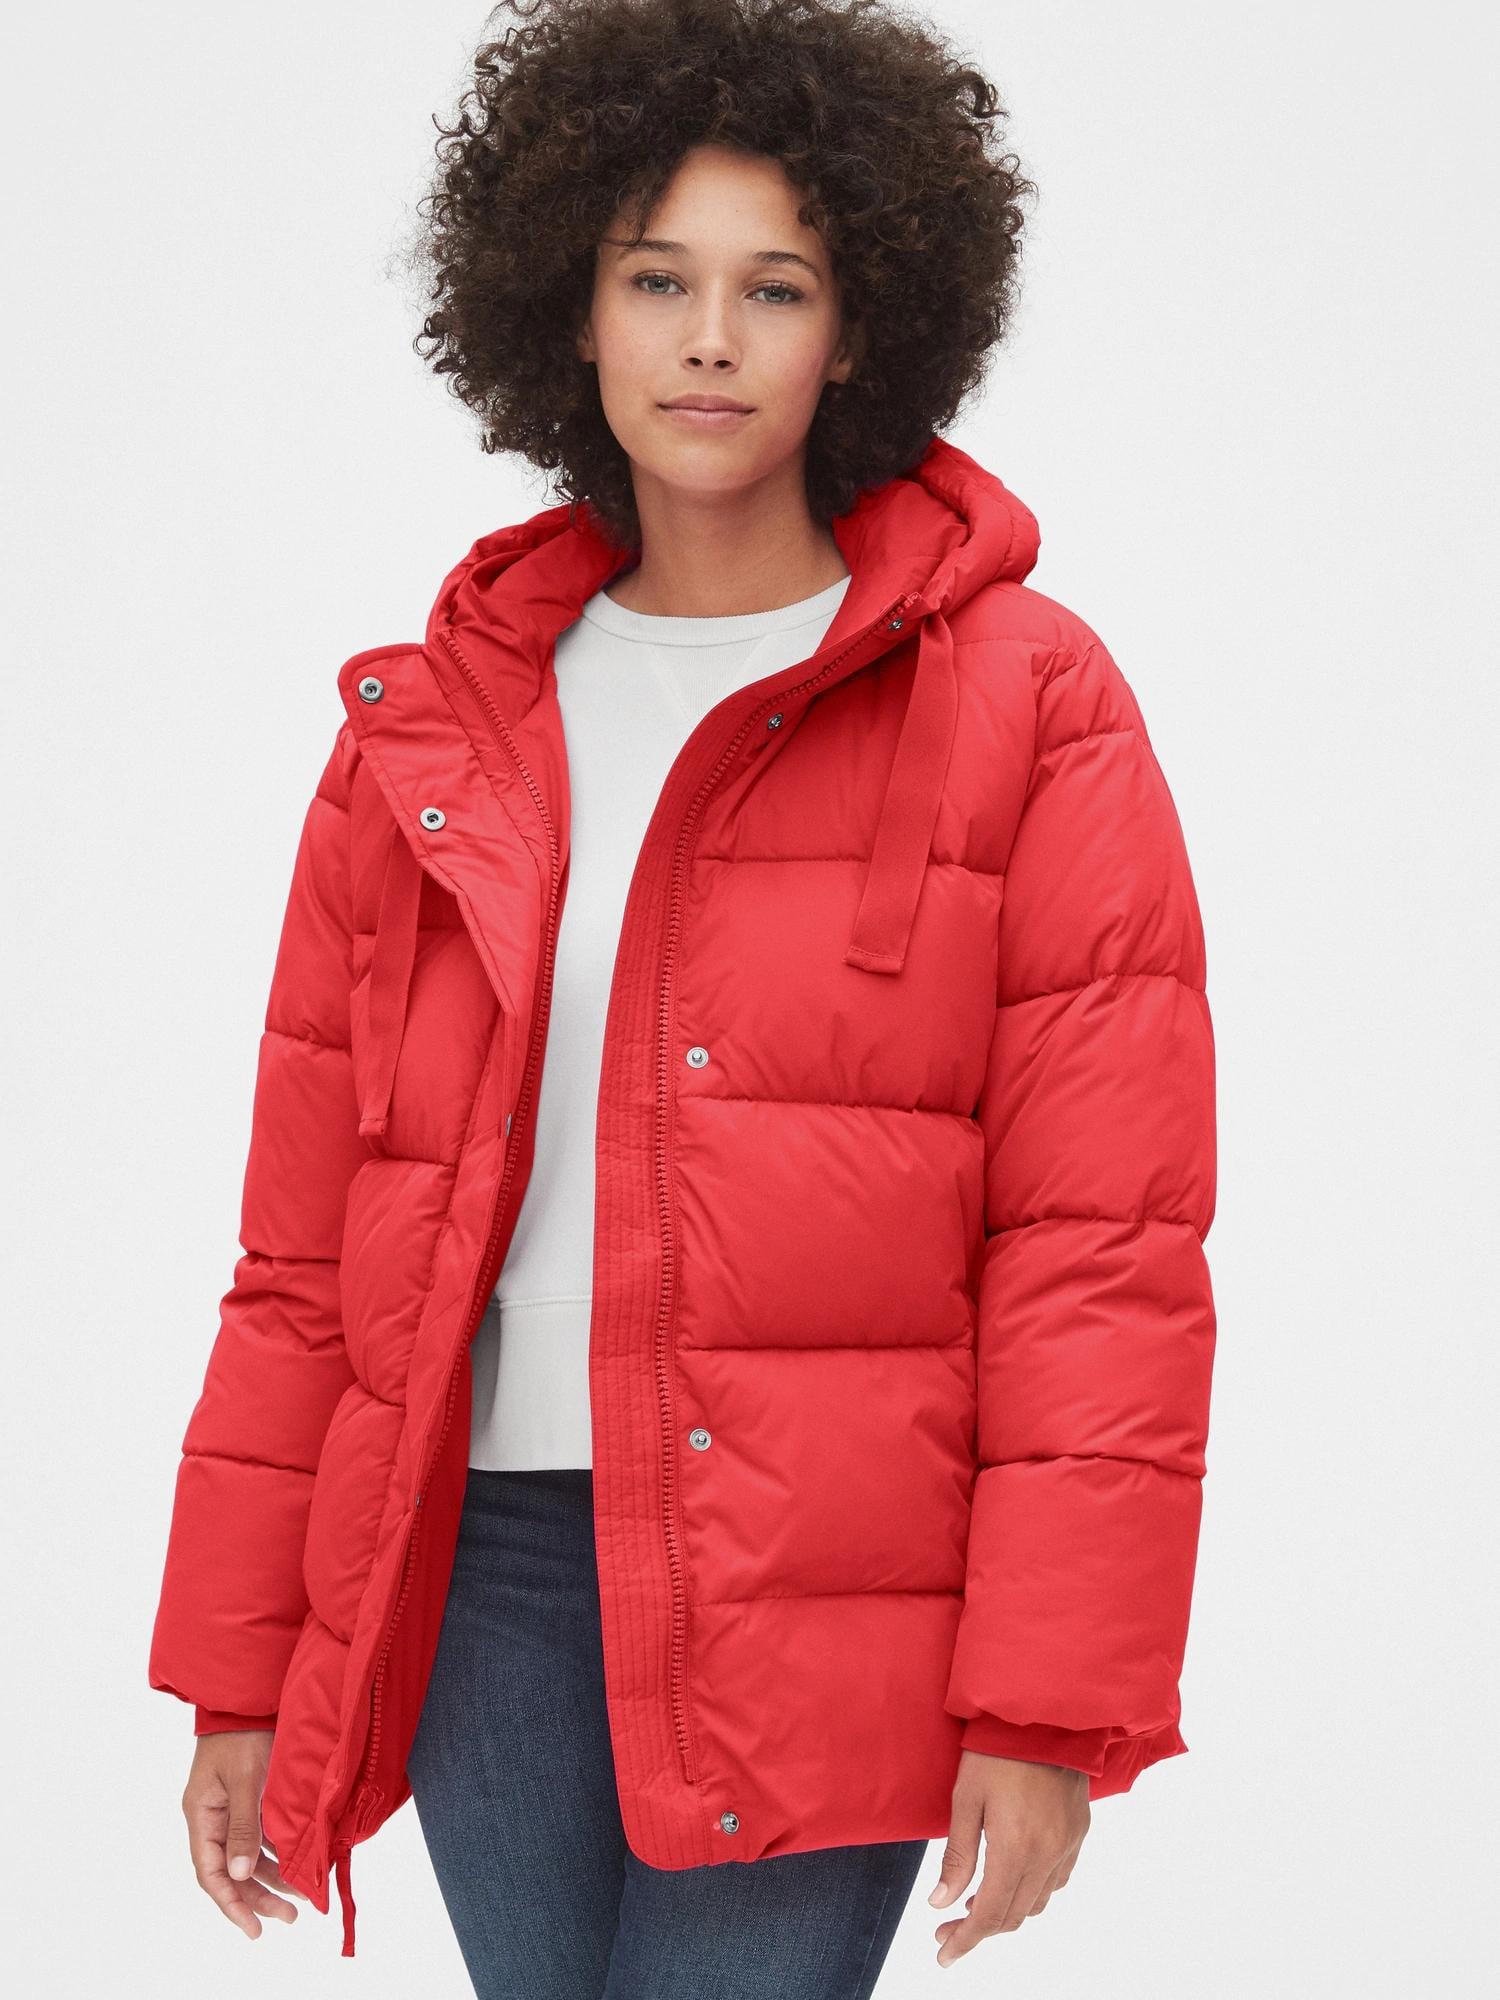 Puffer Jackets For the Whole Family